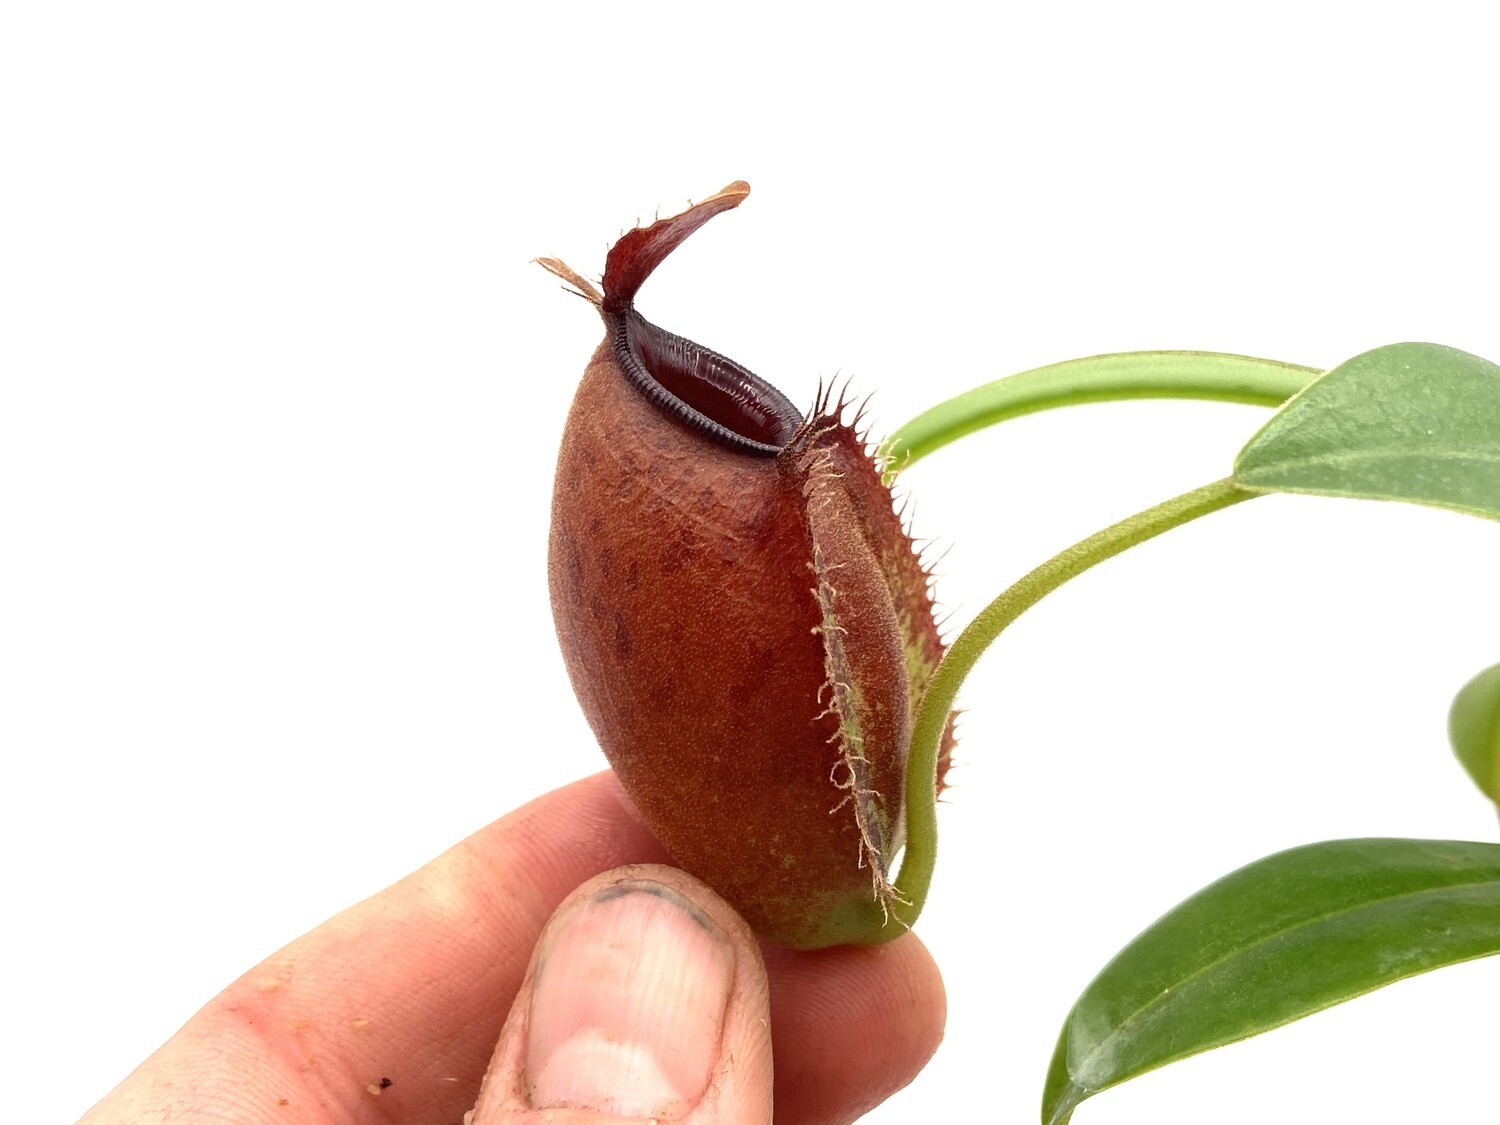 Nepenthes ampullaria x aristolochioides "red form" 